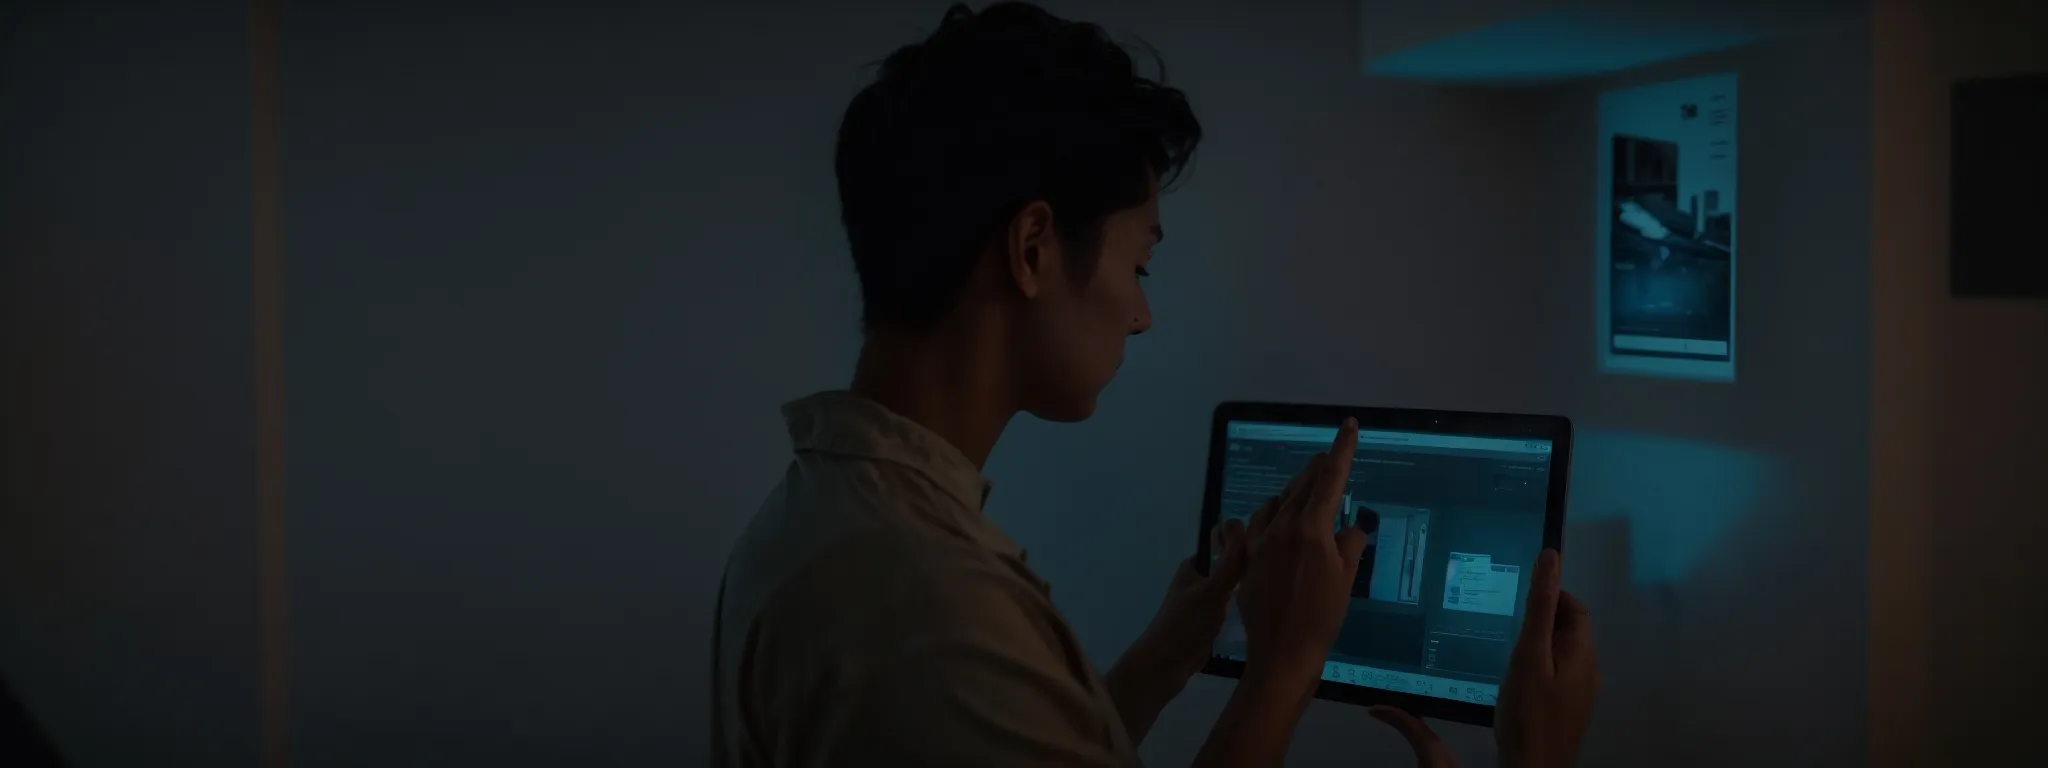 a figure silently scrolling through a digital news feed on a glowing tablet screen in a dimly lit room.